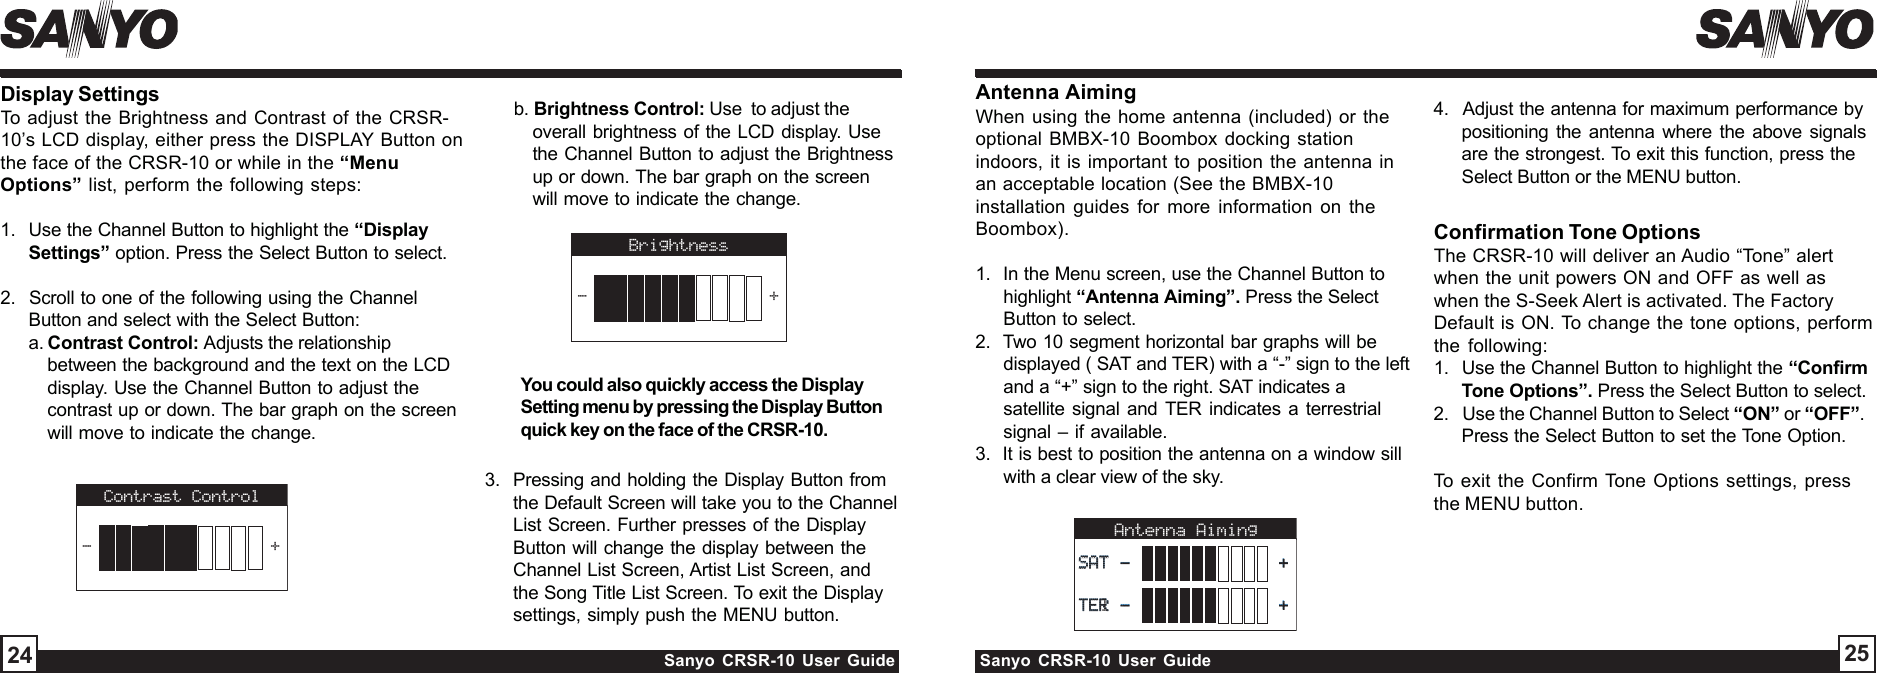 Sanyo CRSR-10 User Guide Sanyo CRSR-10 User GuideDisplay SettingsTo adjust the Brightness and Contrast of the CRSR-10’s LCD display, either press the DISPLAY Button onthe face of the CRSR-10 or while in the “MenuOptions” list, perform the following steps:1.  Use the Channel Button to highlight the “DisplaySettings” option. Press the Select Button to select.2.  Scroll to one of the following using the ChannelButton and select with the Select Button:a. Contrast Control: Adjusts the relationshipbetween the background and the text on the LCDdisplay. Use the Channel Button to adjust thecontrast up or down. The bar graph on the screenwill move to indicate the change.2524Antenna AimingWhen using the home antenna (included) or theoptional BMBX-10 Boombox docking stationindoors, it is important to position the antenna inan acceptable location (See the BMBX-10installation guides for more information on theBoombox).1.  In the Menu screen, use the Channel Button tohighlight “Antenna Aiming”. Press the SelectButton to select.2.  Two 10 segment horizontal bar graphs will bedisplayed ( SAT and TER) with a “-” sign to the leftand a “+” sign to the right. SAT indicates asatellite signal and TER indicates a terrestrialsignal – if available.3.  It is best to position the antenna on a window sillwith a clear view of the sky.Antenna Aiming TERTERTERl SATSATSAT----++++Confirmation Tone OptionsThe CRSR-10 will deliver an Audio “Tone” alertwhen the unit powers ON and OFF as well aswhen the S-Seek Alert is activated. The FactoryDefault is ON. To change the tone options, performthe following:1.  Use the Channel Button to highlight the “ConfirmTone Options”. Press the Select Button to select.2.   Use the Channel Button to Select “ON” or “OFF”.Press the Select Button to set the Tone Option.To exit the Confirm Tone Options settings, pressthe MENU button.3.  Pressing and holding the Display Button fromthe Default Screen will take you to the ChannelList Screen. Further presses of the DisplayButton will change the display between theChannel List Screen, Artist List Screen, andthe Song Title List Screen. To exit the Displaysettings, simply push the MENU button.4.  Adjust the antenna for maximum performance bypositioning the antenna where the above signalsare the strongest. To exit this function, press theSelect Button or the MENU button.Contrast Control-+Brightness-+     You could also quickly access the DisplaySetting menu by pressing the Display Buttonquick key on the face of the CRSR-10.b. Brightness Control: Use  to adjust theoverall brightness of the LCD display. Usethe Channel Button to adjust the Brightnessup or down. The bar graph on the screenwill move to indicate the change.